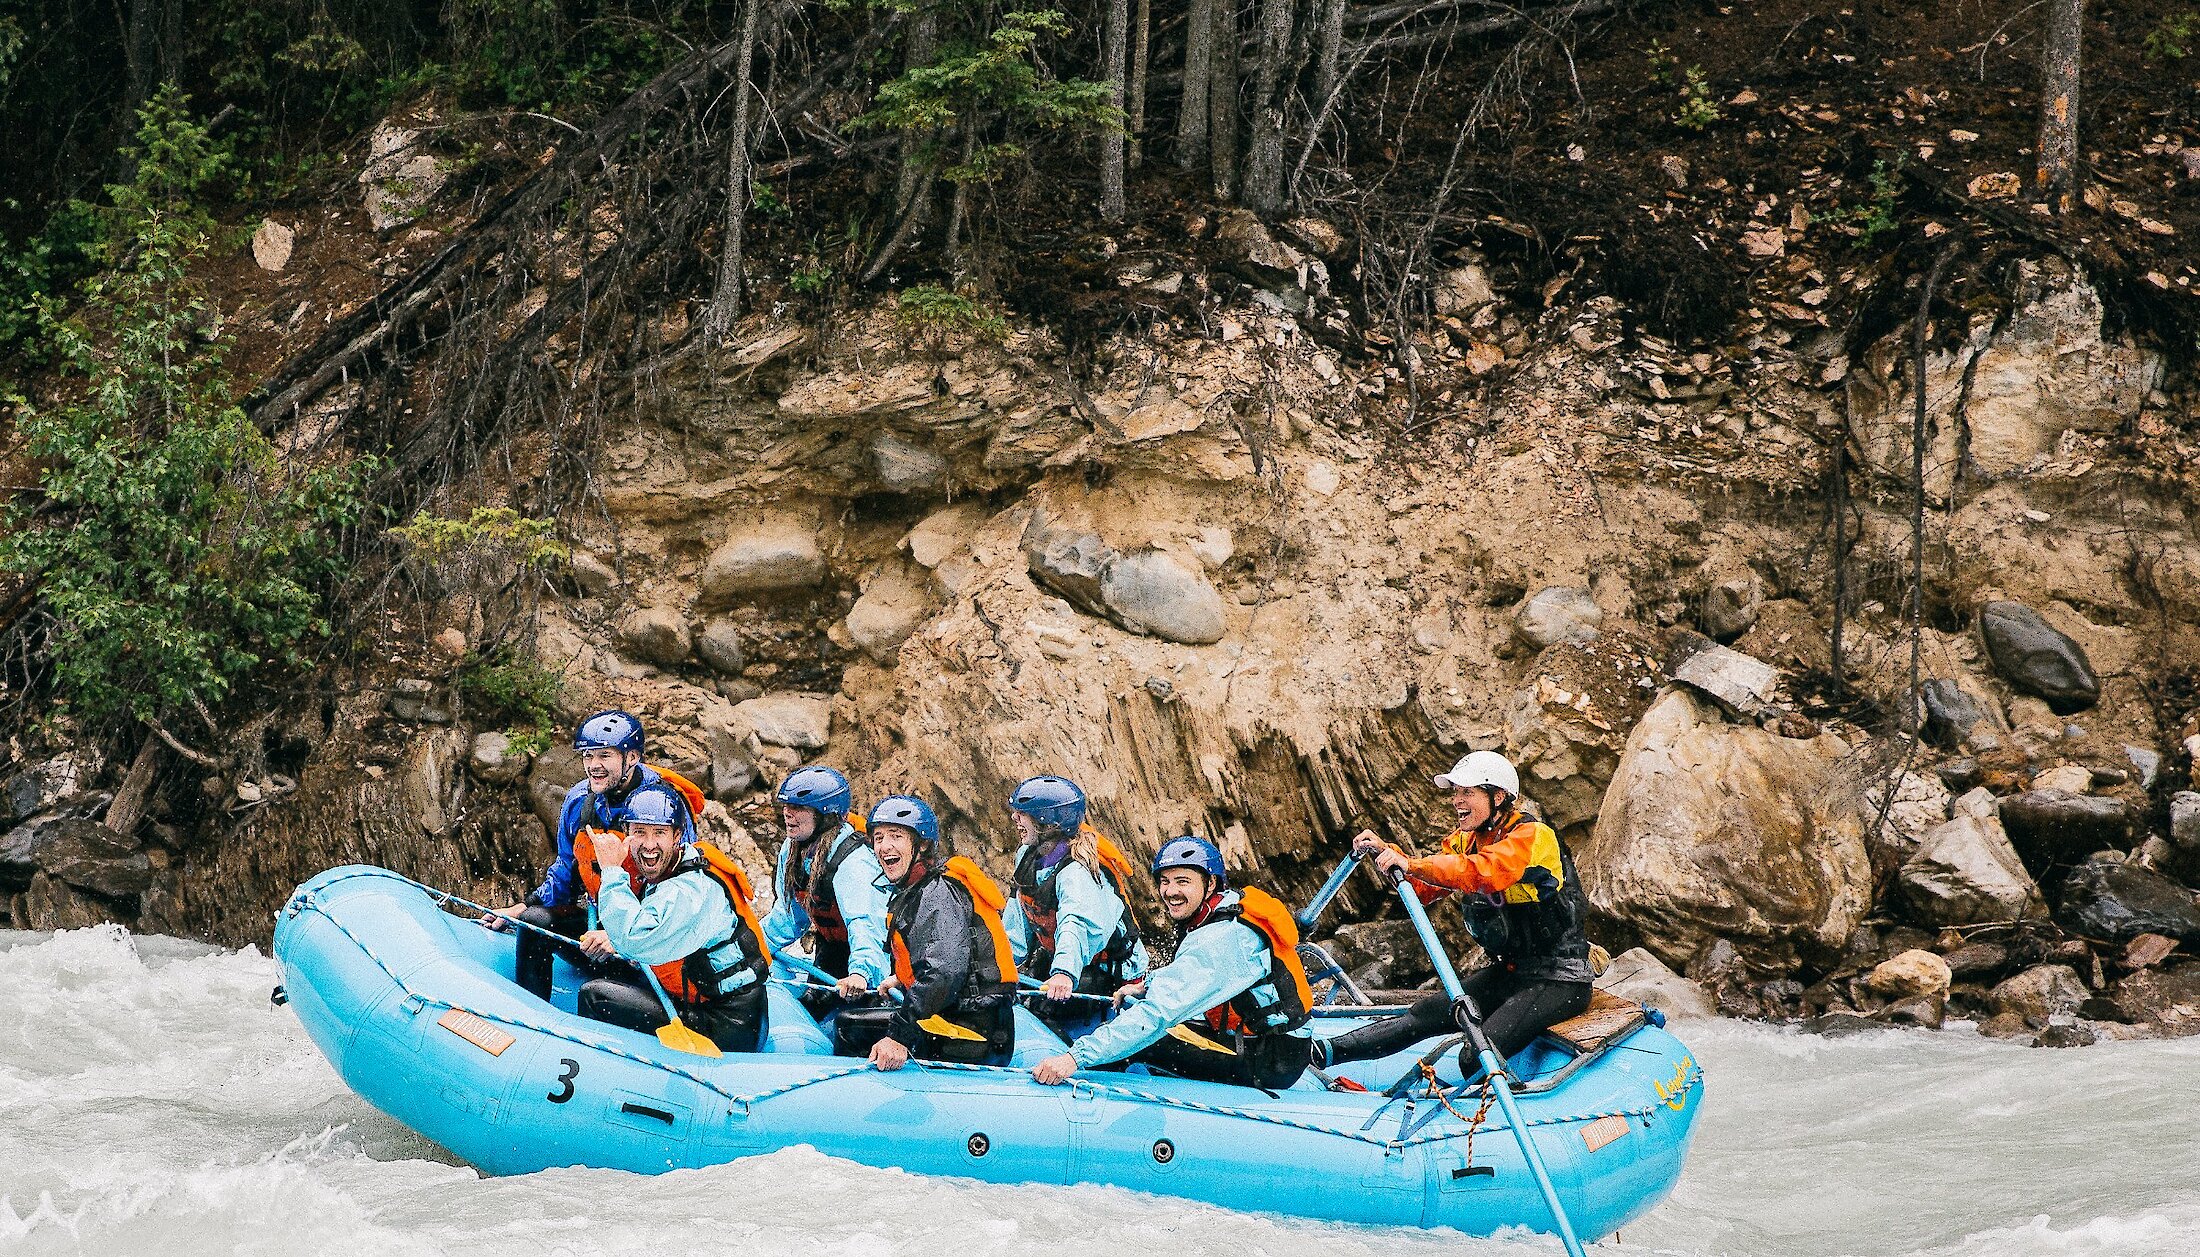 Get ready to get wet on a raft trip on the Kicking Horse